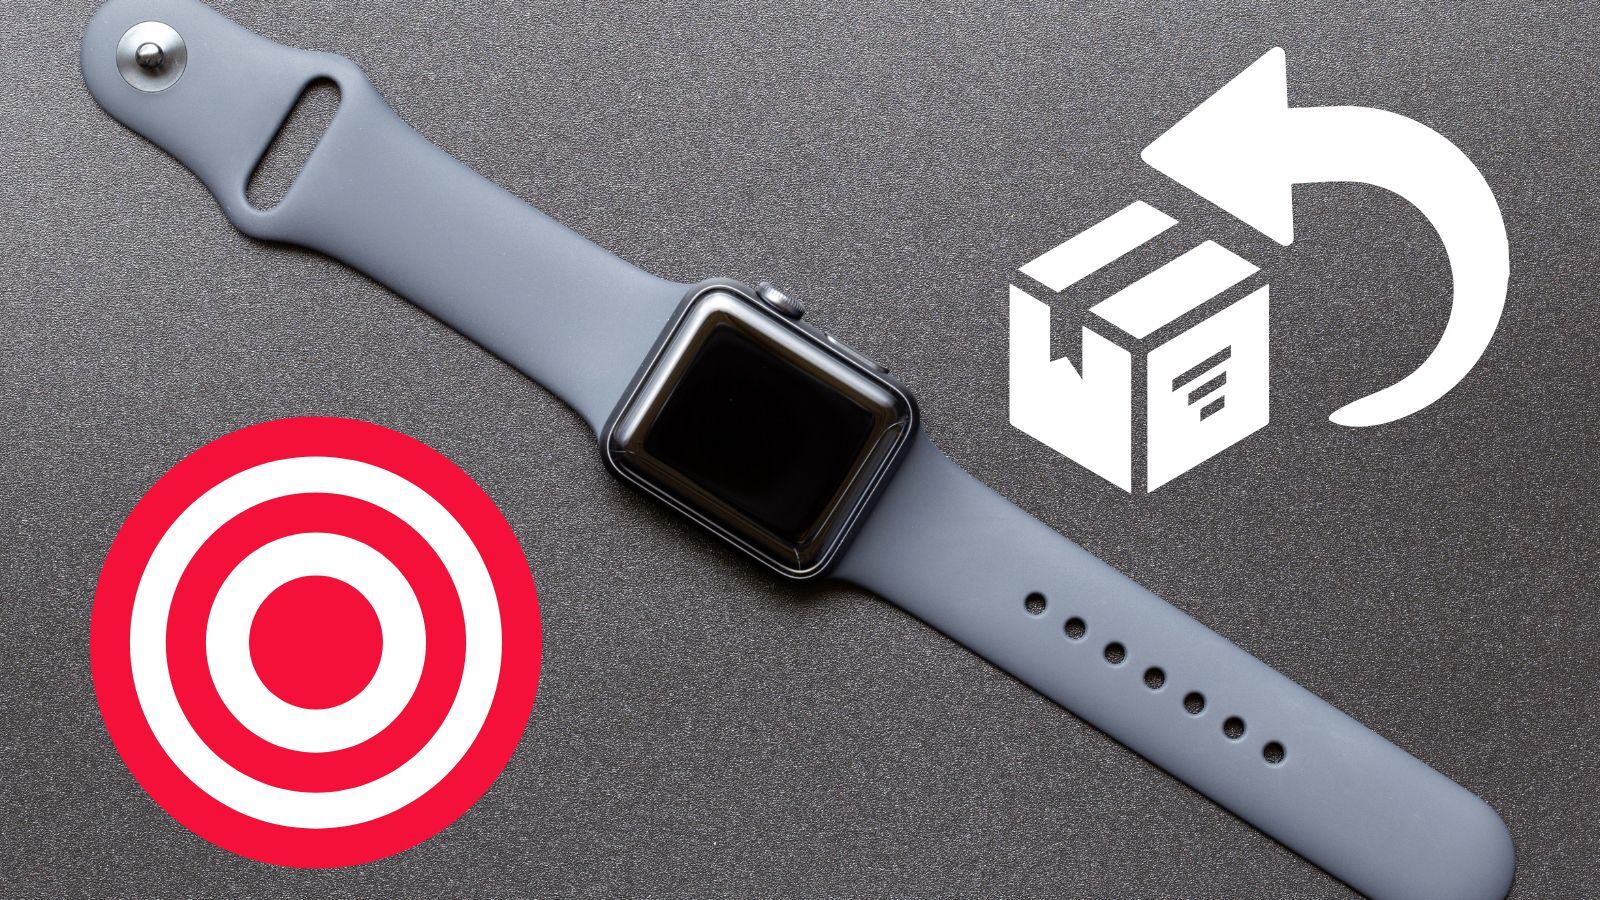 Target Apple Watch Return Policy (Here Is What You Need)